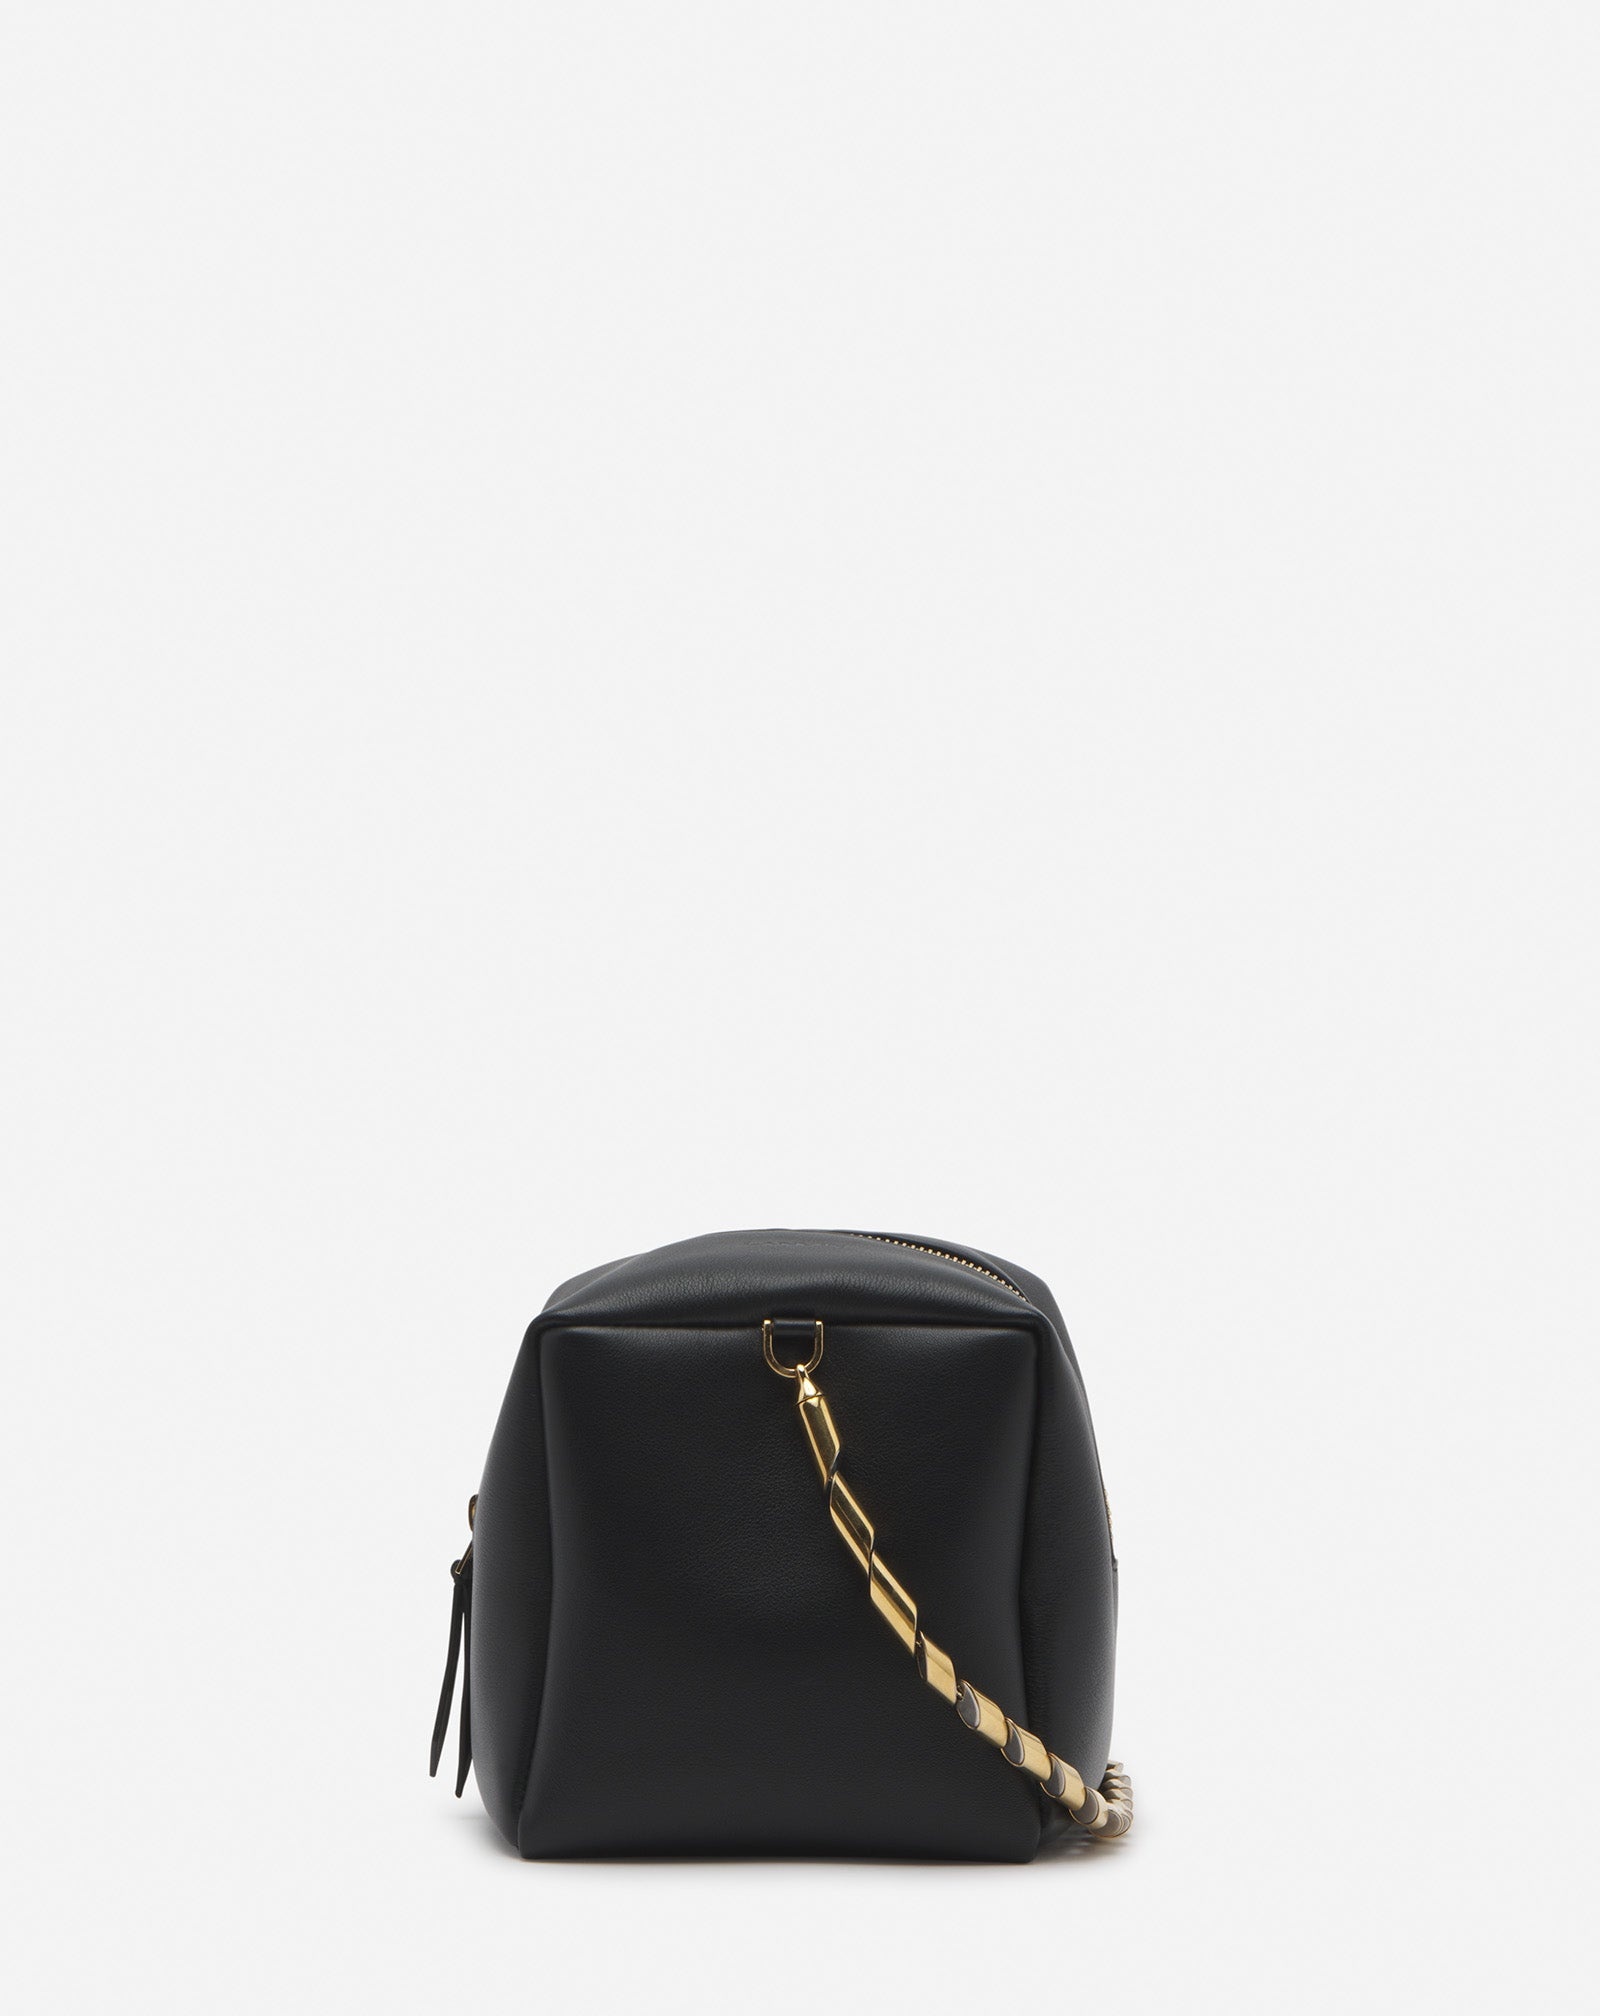 TEMPO BY LANVIN LEATHER BAG WITH SEQUENCE BY LANVIN CHAIN - 1